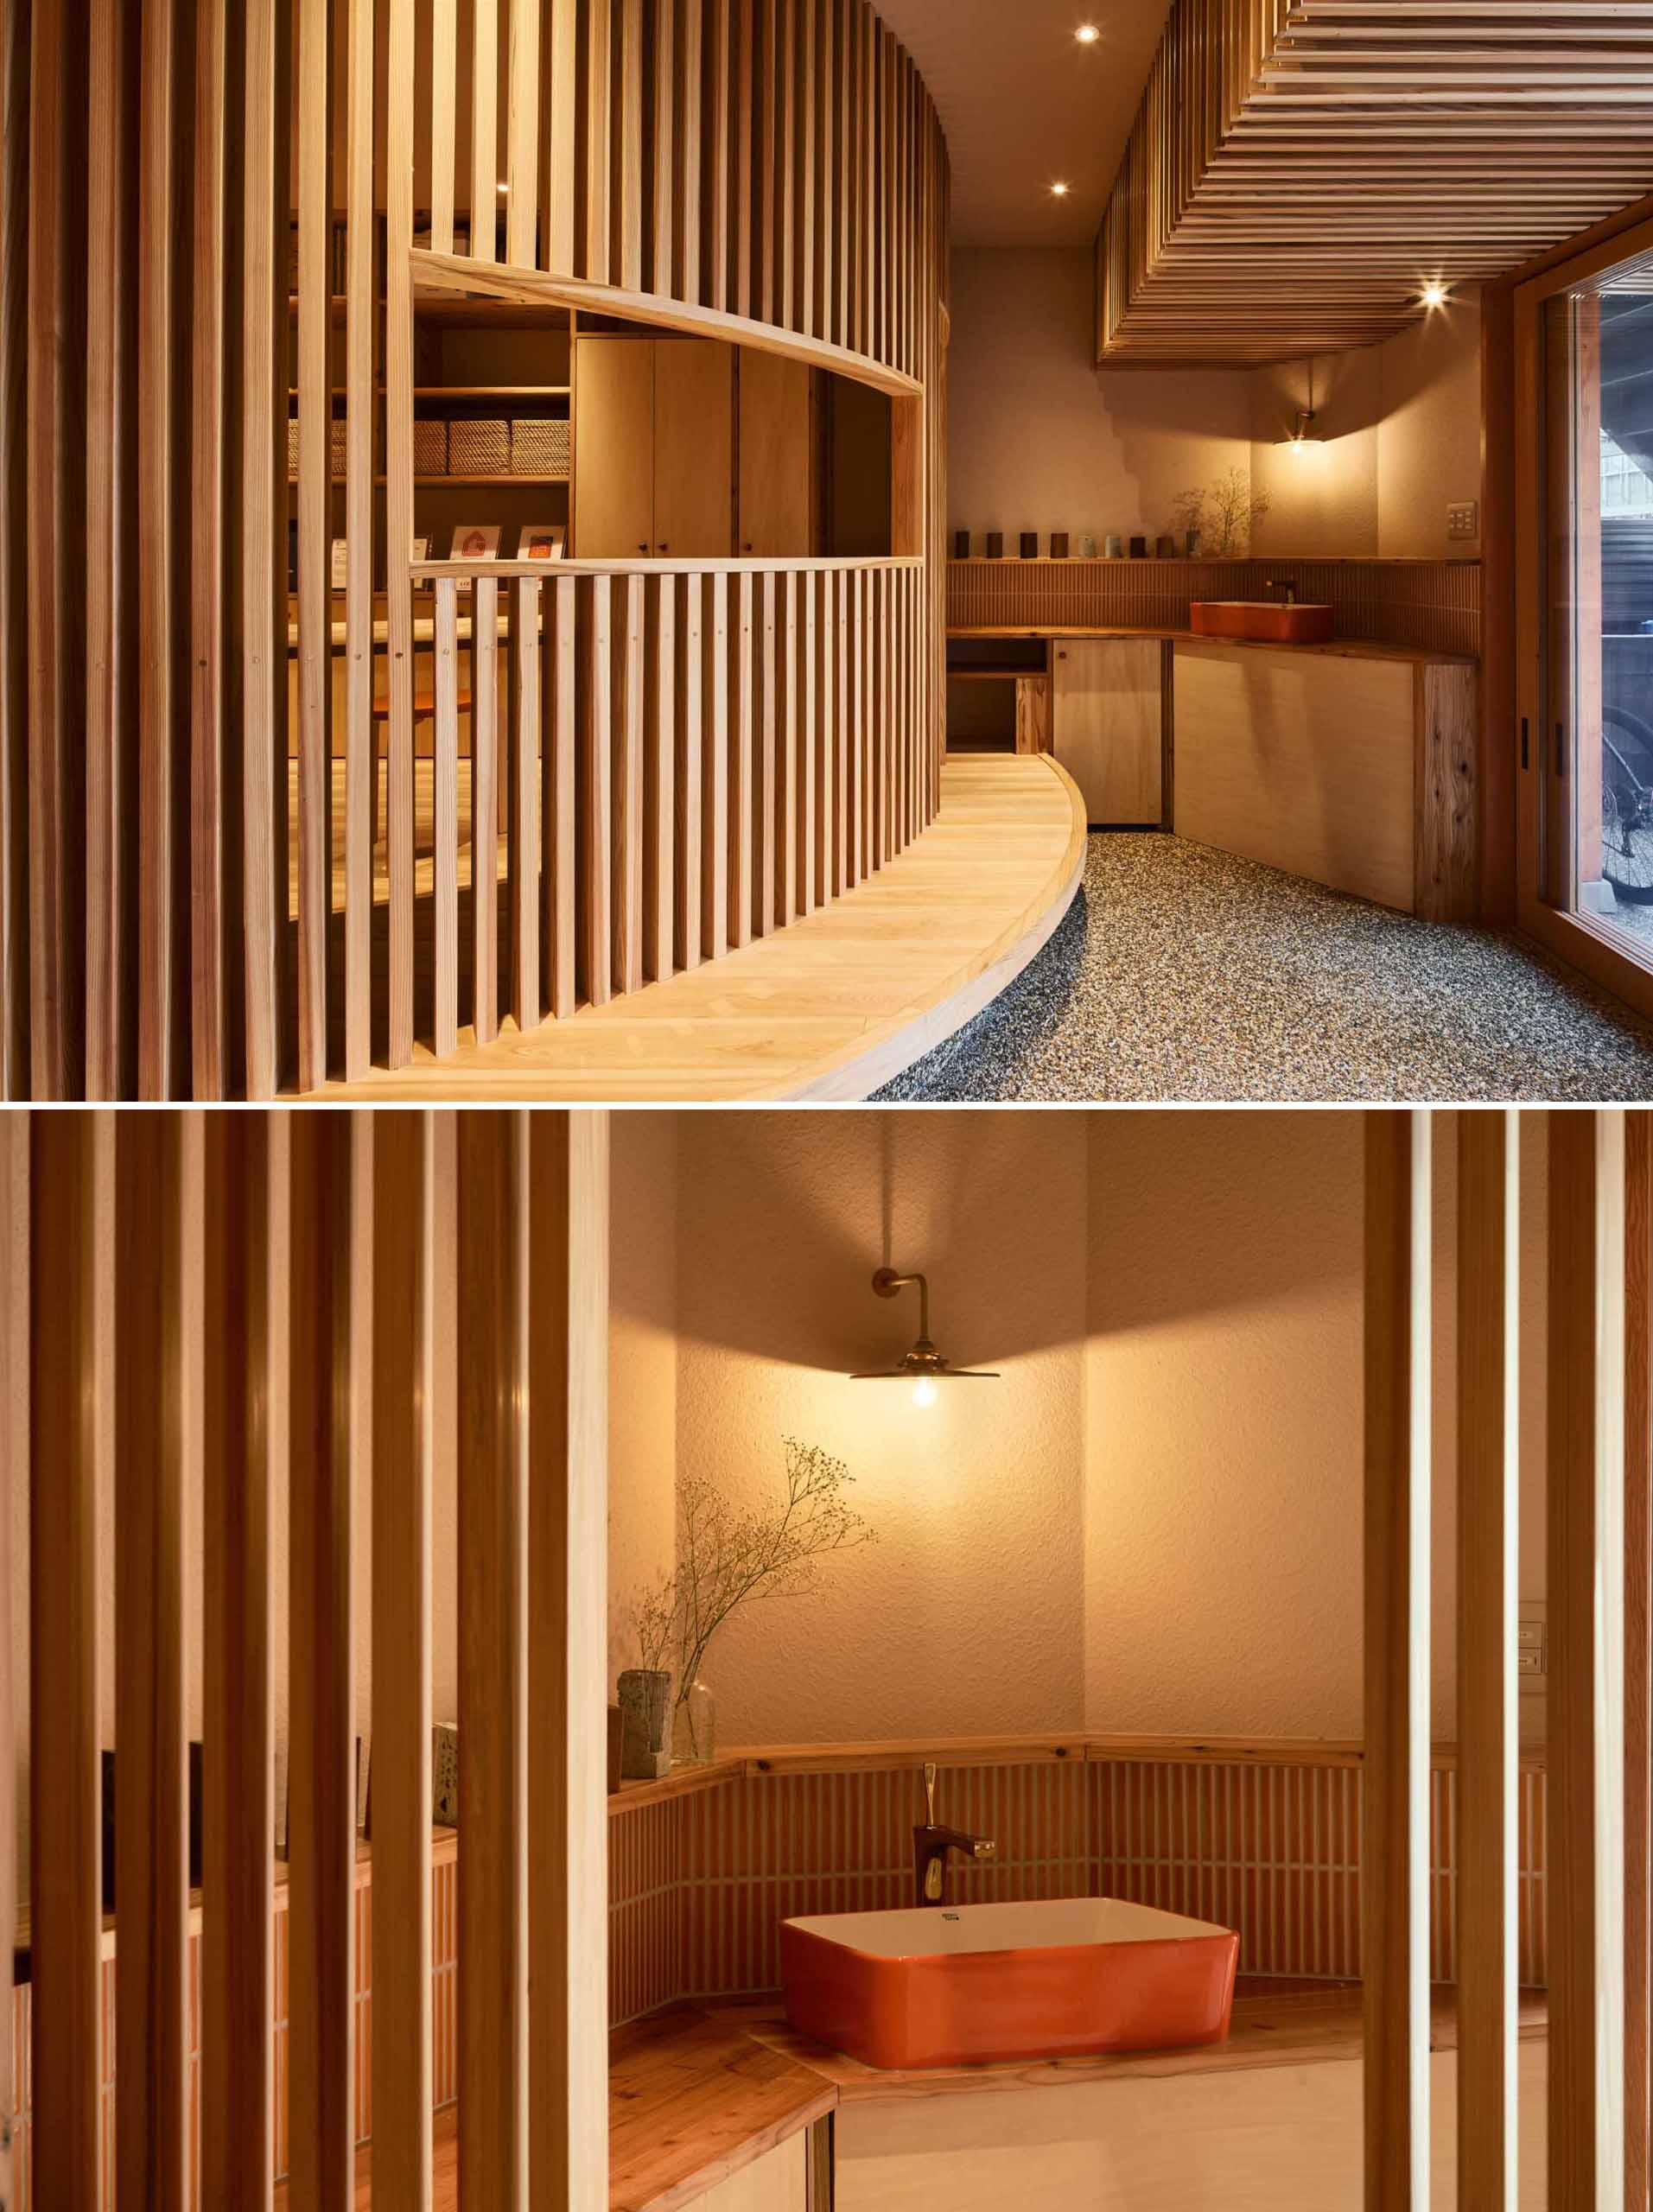 A small wood-lined office that was once a parking lot in Kyoto.